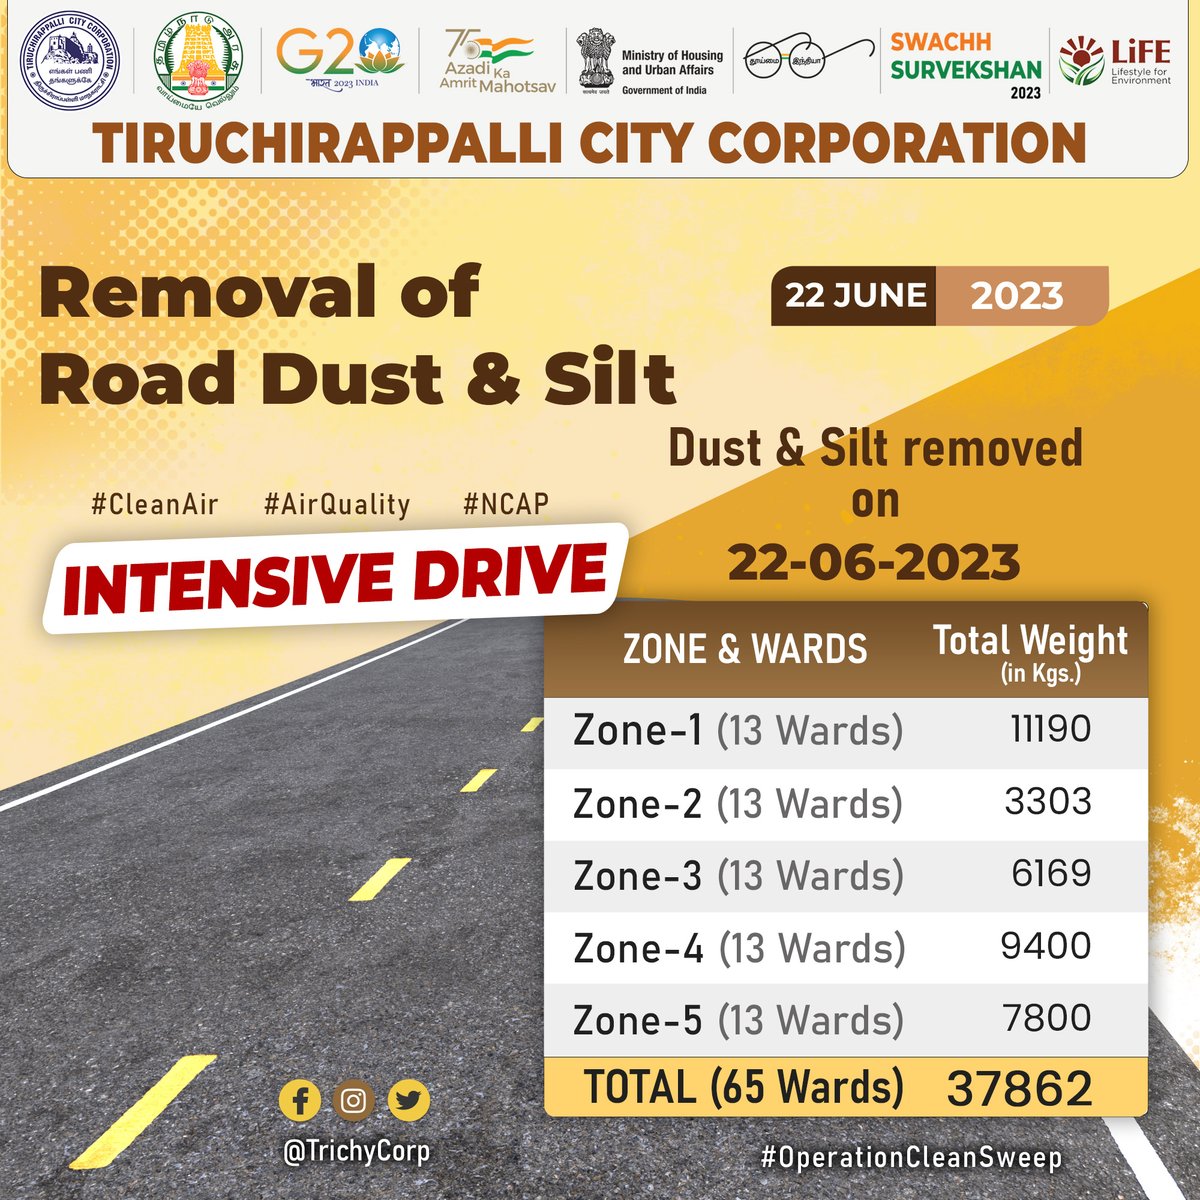 INTENSIVE DRIVE 

Road Dust & Silt removed on 22-06-2023

#TrichyCorporation #LetsKeepTrichyClean #OperationCleanSweep #CleanAir #AirPollution #NCAP #SwachhBharatMission #SwachhSurvekshan #CleanCityCampaign #RRR4LiFE #ChooseLiFE #IndiaVsGarbage #MissionLiFE